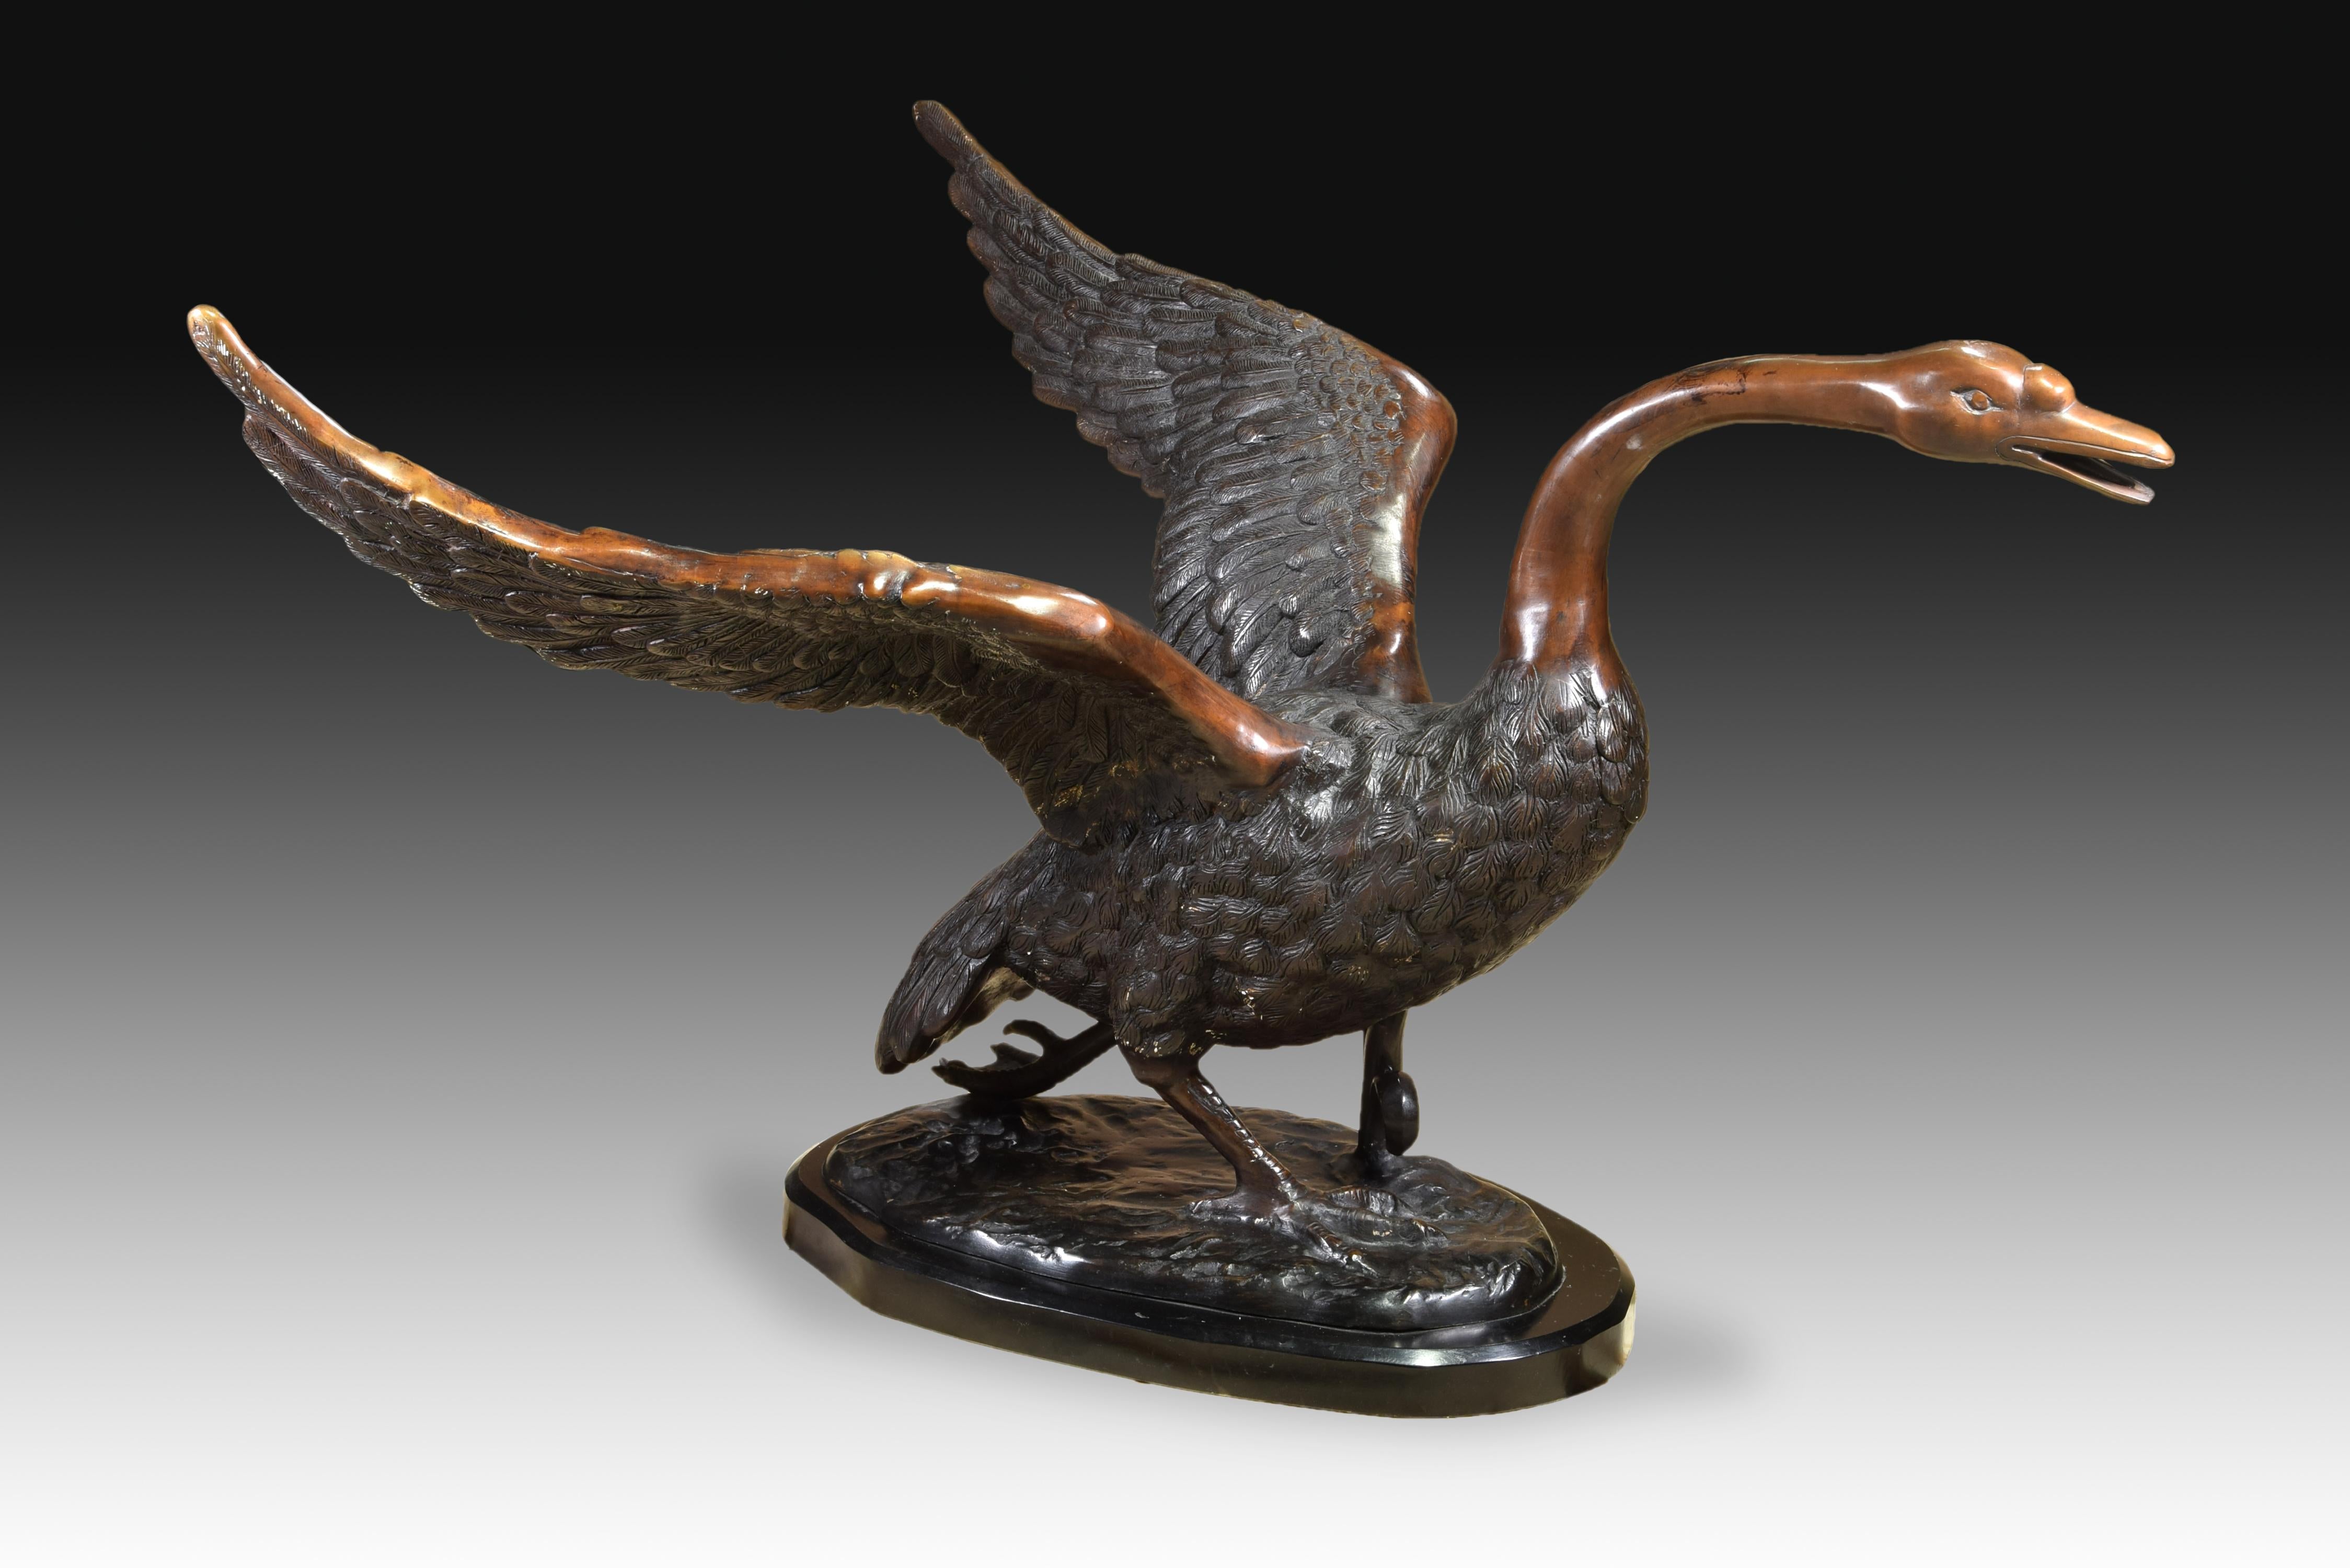 Cisne, table base for glass. Marble and bronze, 20th century.
 Table base in the shape of a swan taking off from a surface of water, made of bronze and placed on an oval base in dark marble. The figure is more reminiscent in some details of